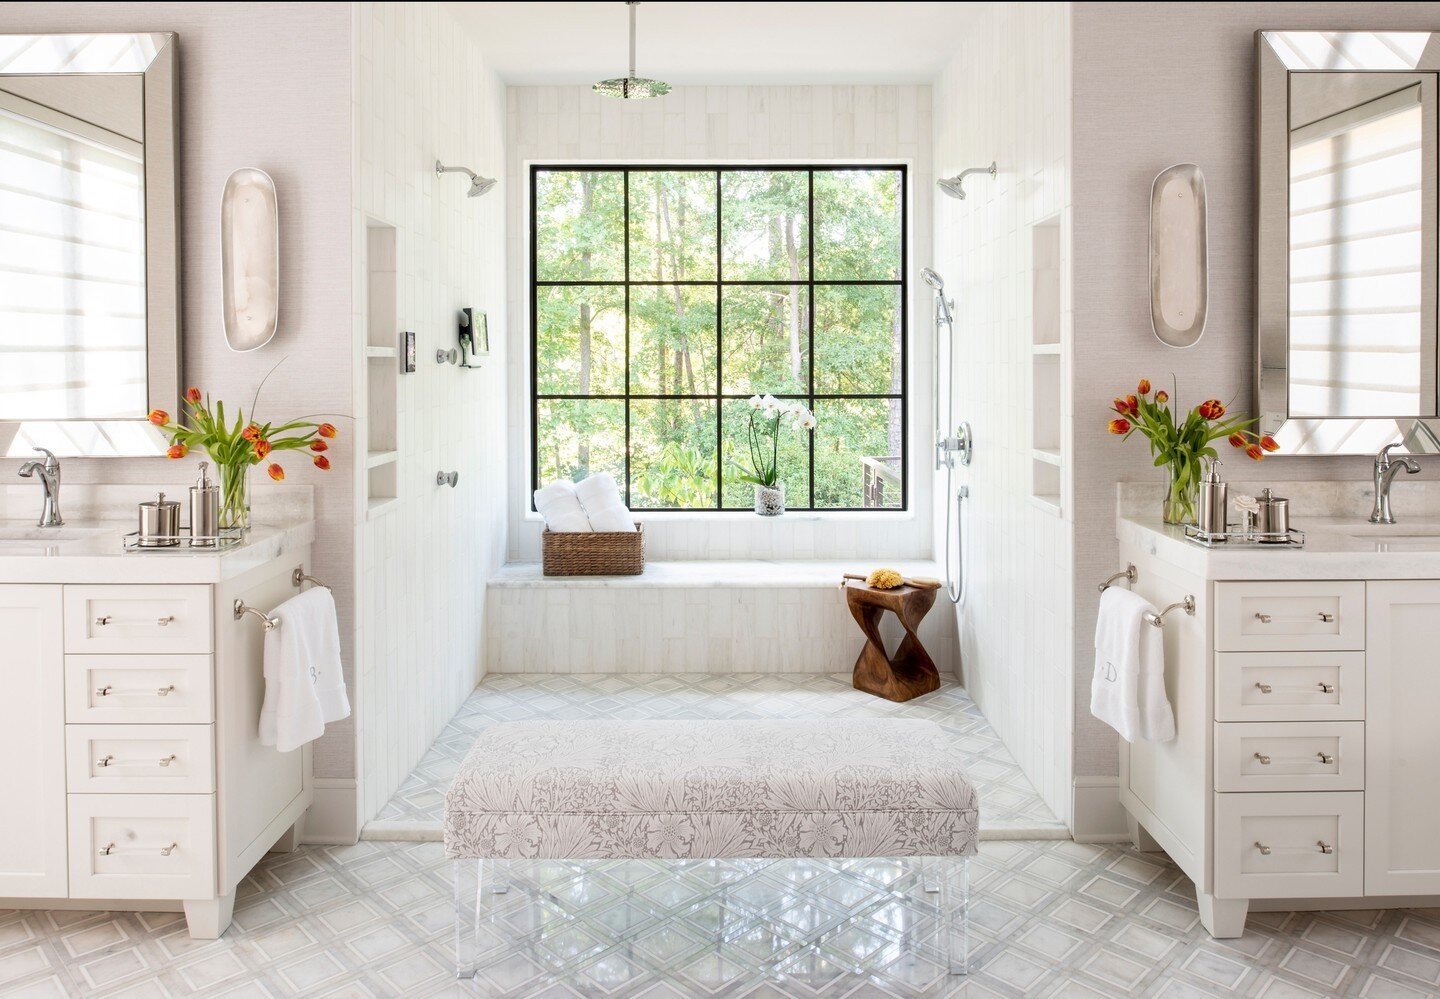 Trends in home design have been leaning towards larger and more luxurious bathrooms, especially in high-end homes. In upscale residences, it's not uncommon to find spa bathrooms that can range from 150 to 250 square feet or even more. These spacious 